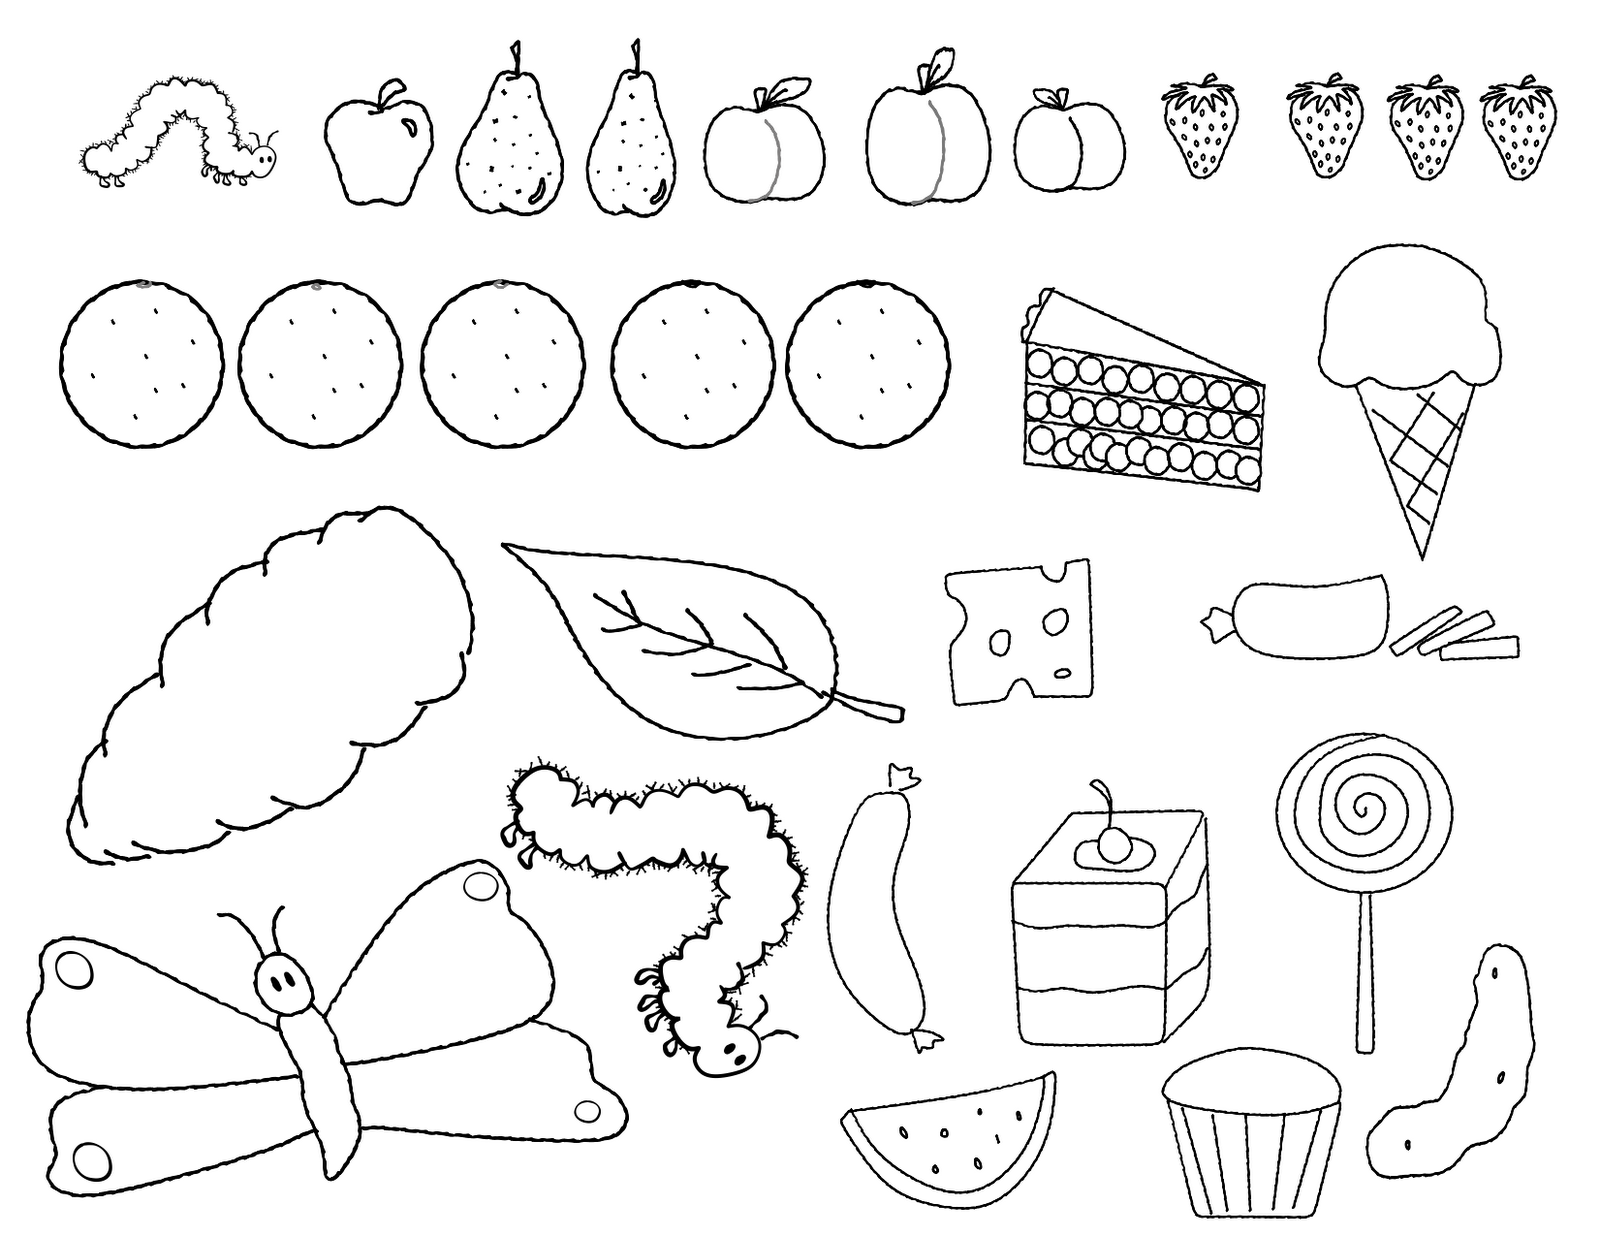 Drawing Caterpillar 20 Animals – Printable coloring pages